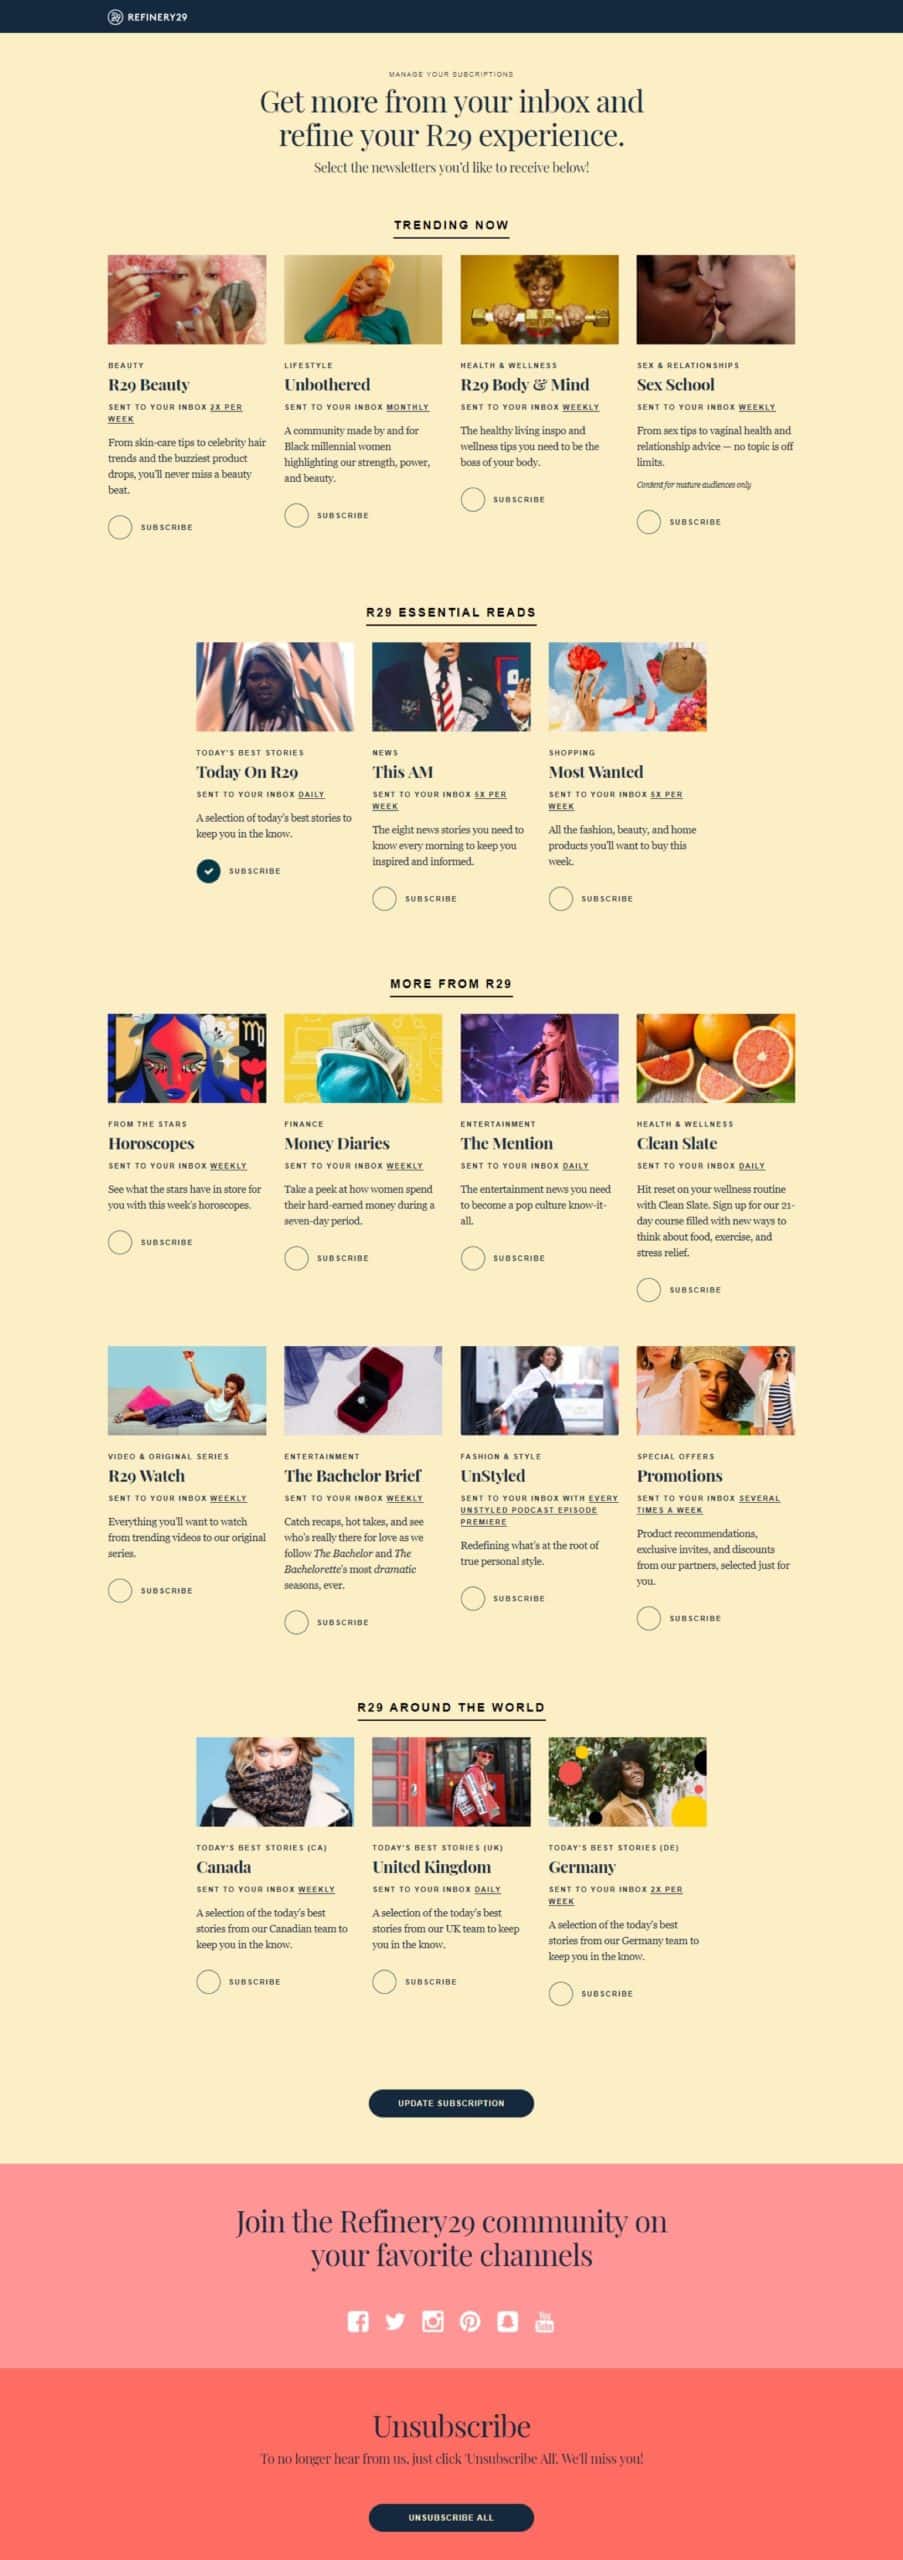 refinery29-unsubscribe-page